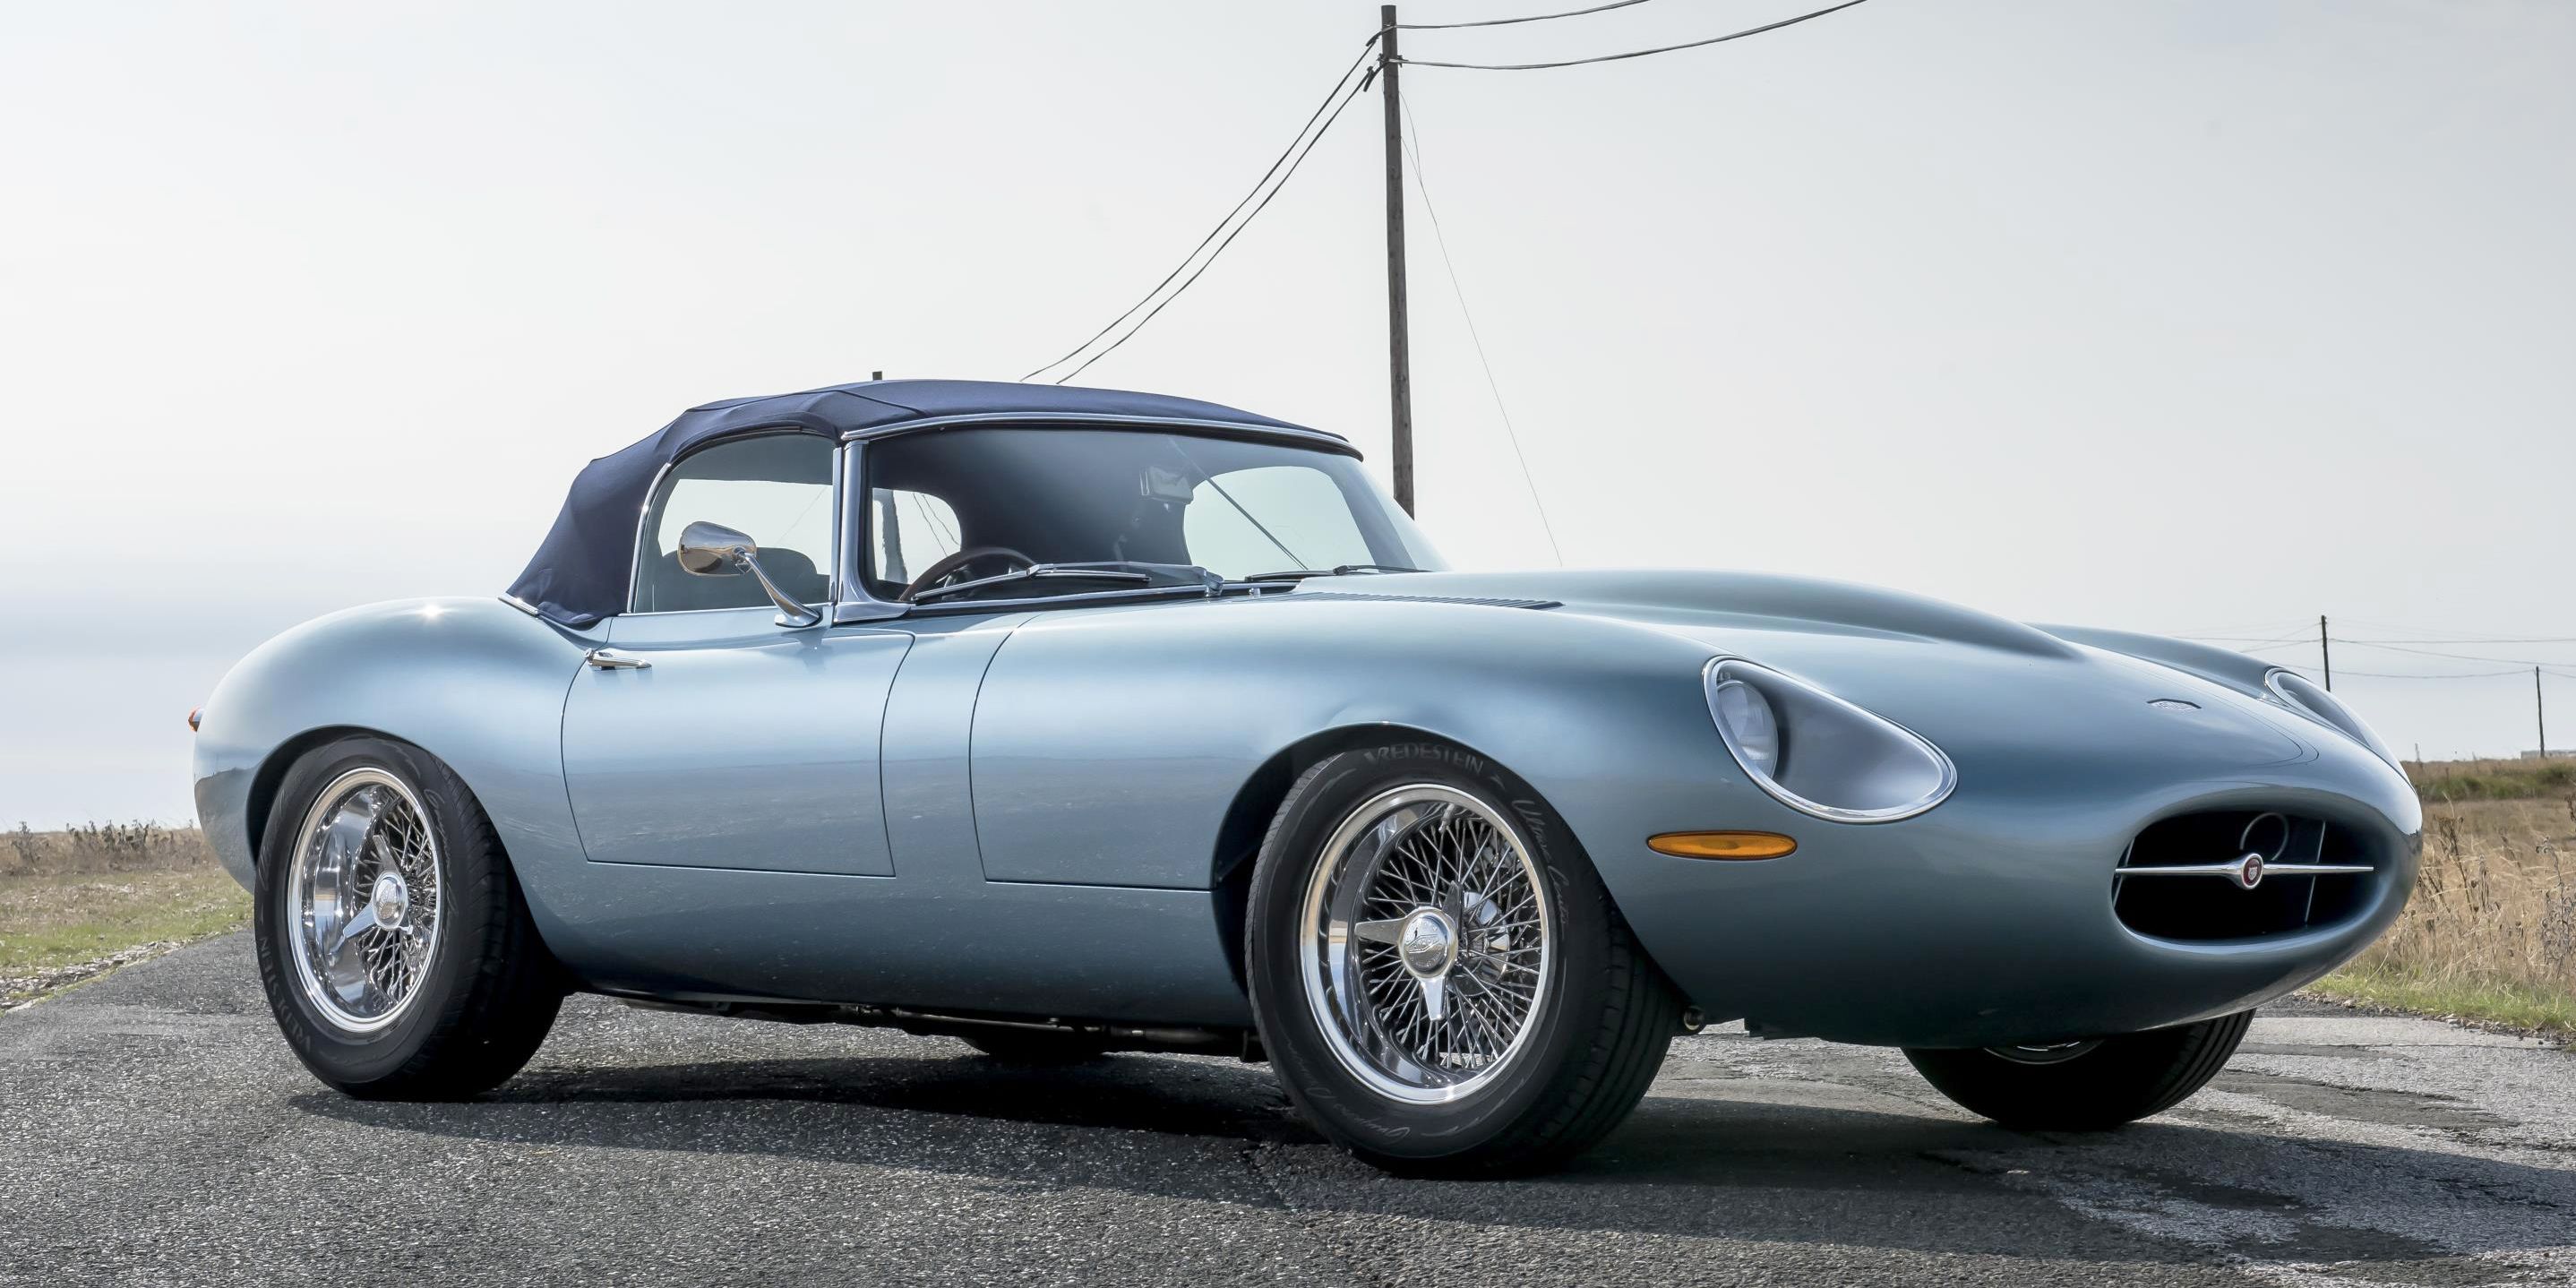 Why Spend Your Money on Anything Else When the Eagle Spyder GT Exists?